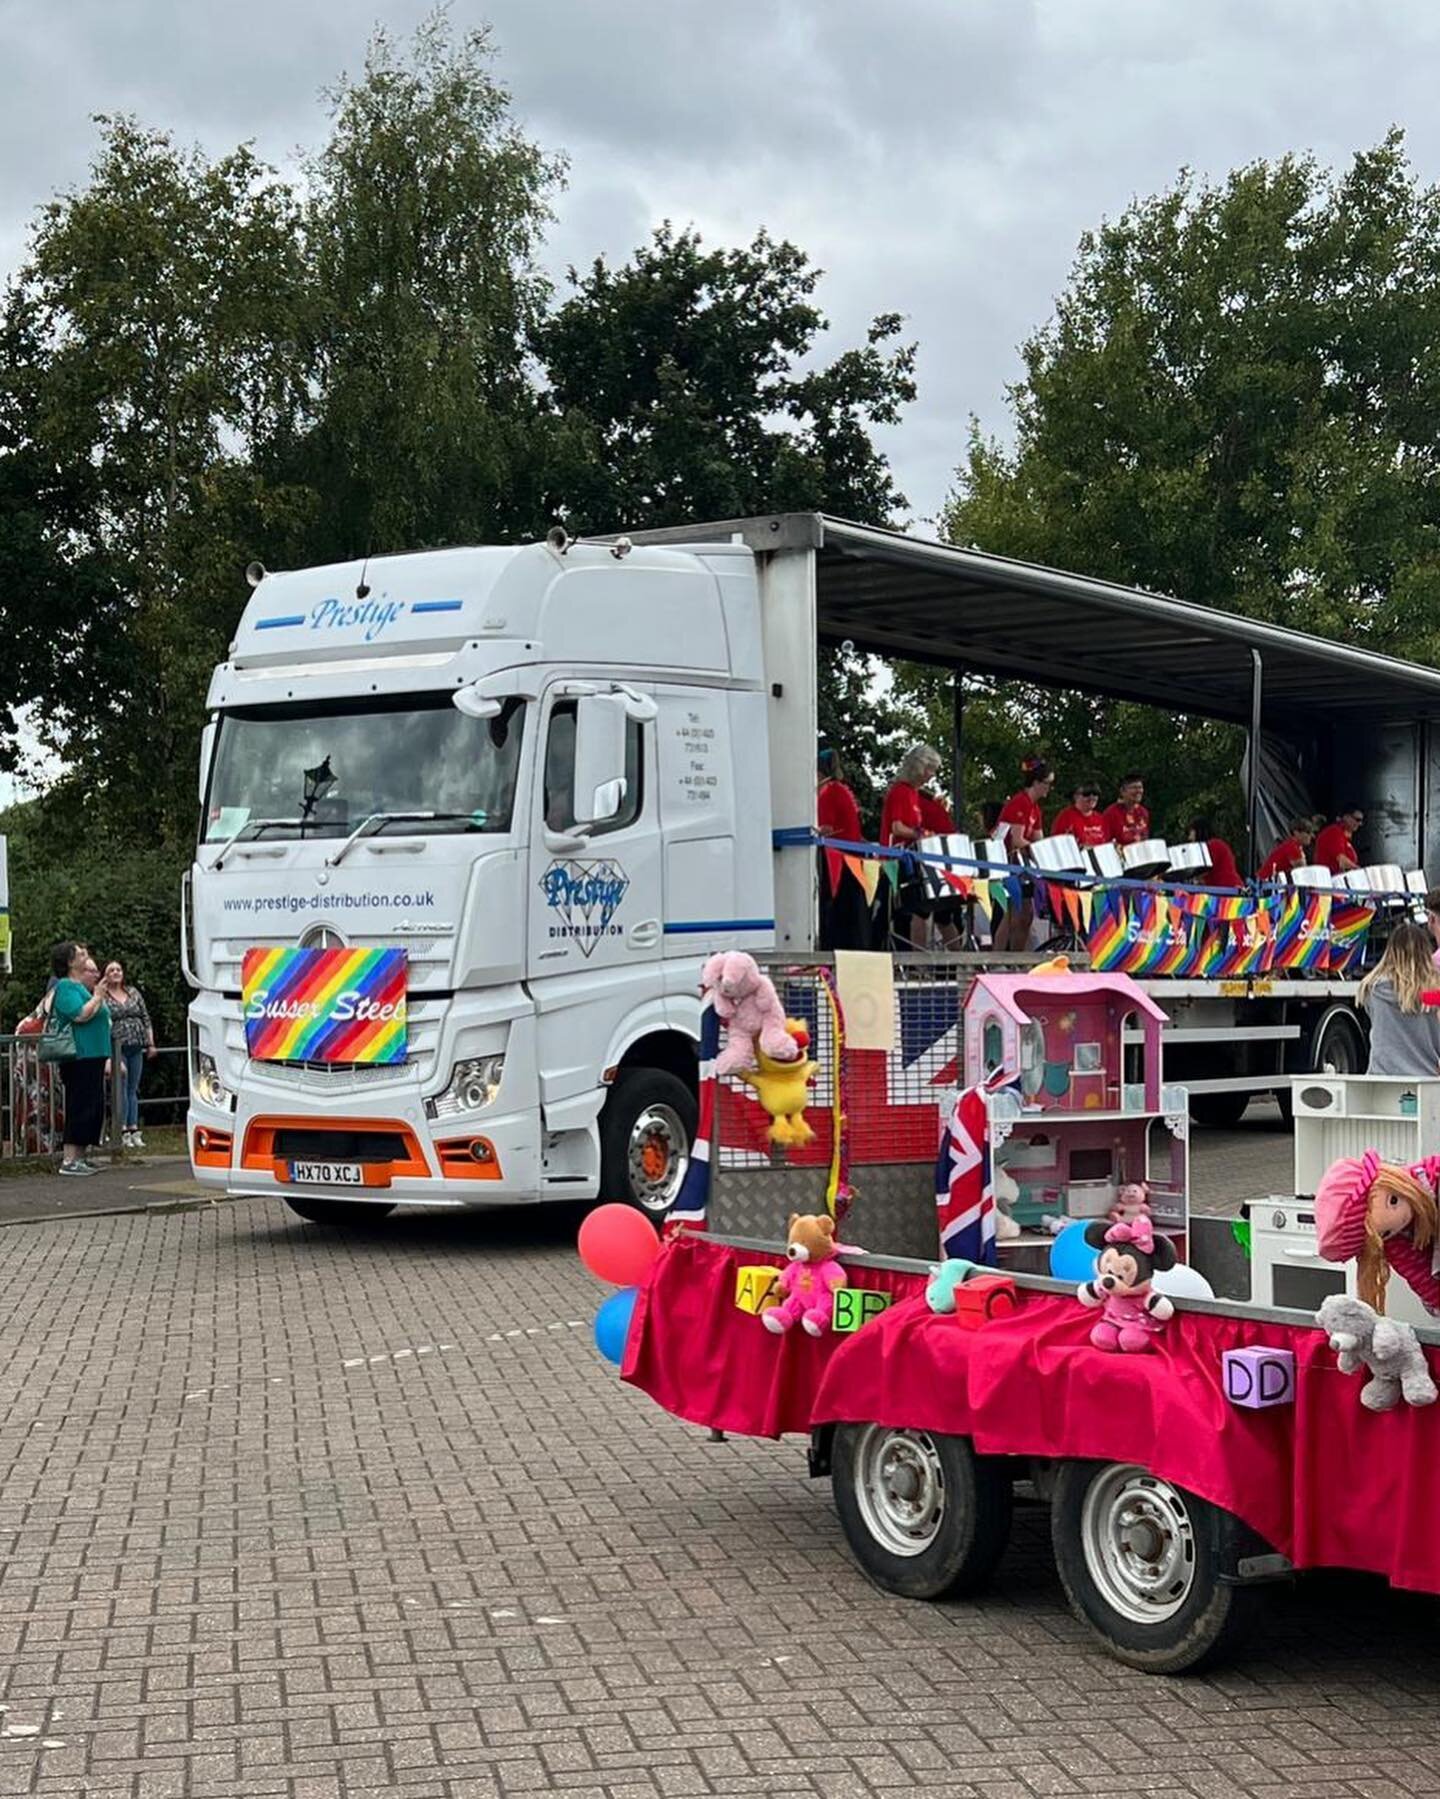 🎊 Ashington Festival 🎊

Saturday we were proud to help out for the Ashington Fate!

A local village to us &amp; we always feel privileged to be asked to provide vehicles for the floats! Something we have been doing for many years now &hellip; in fa